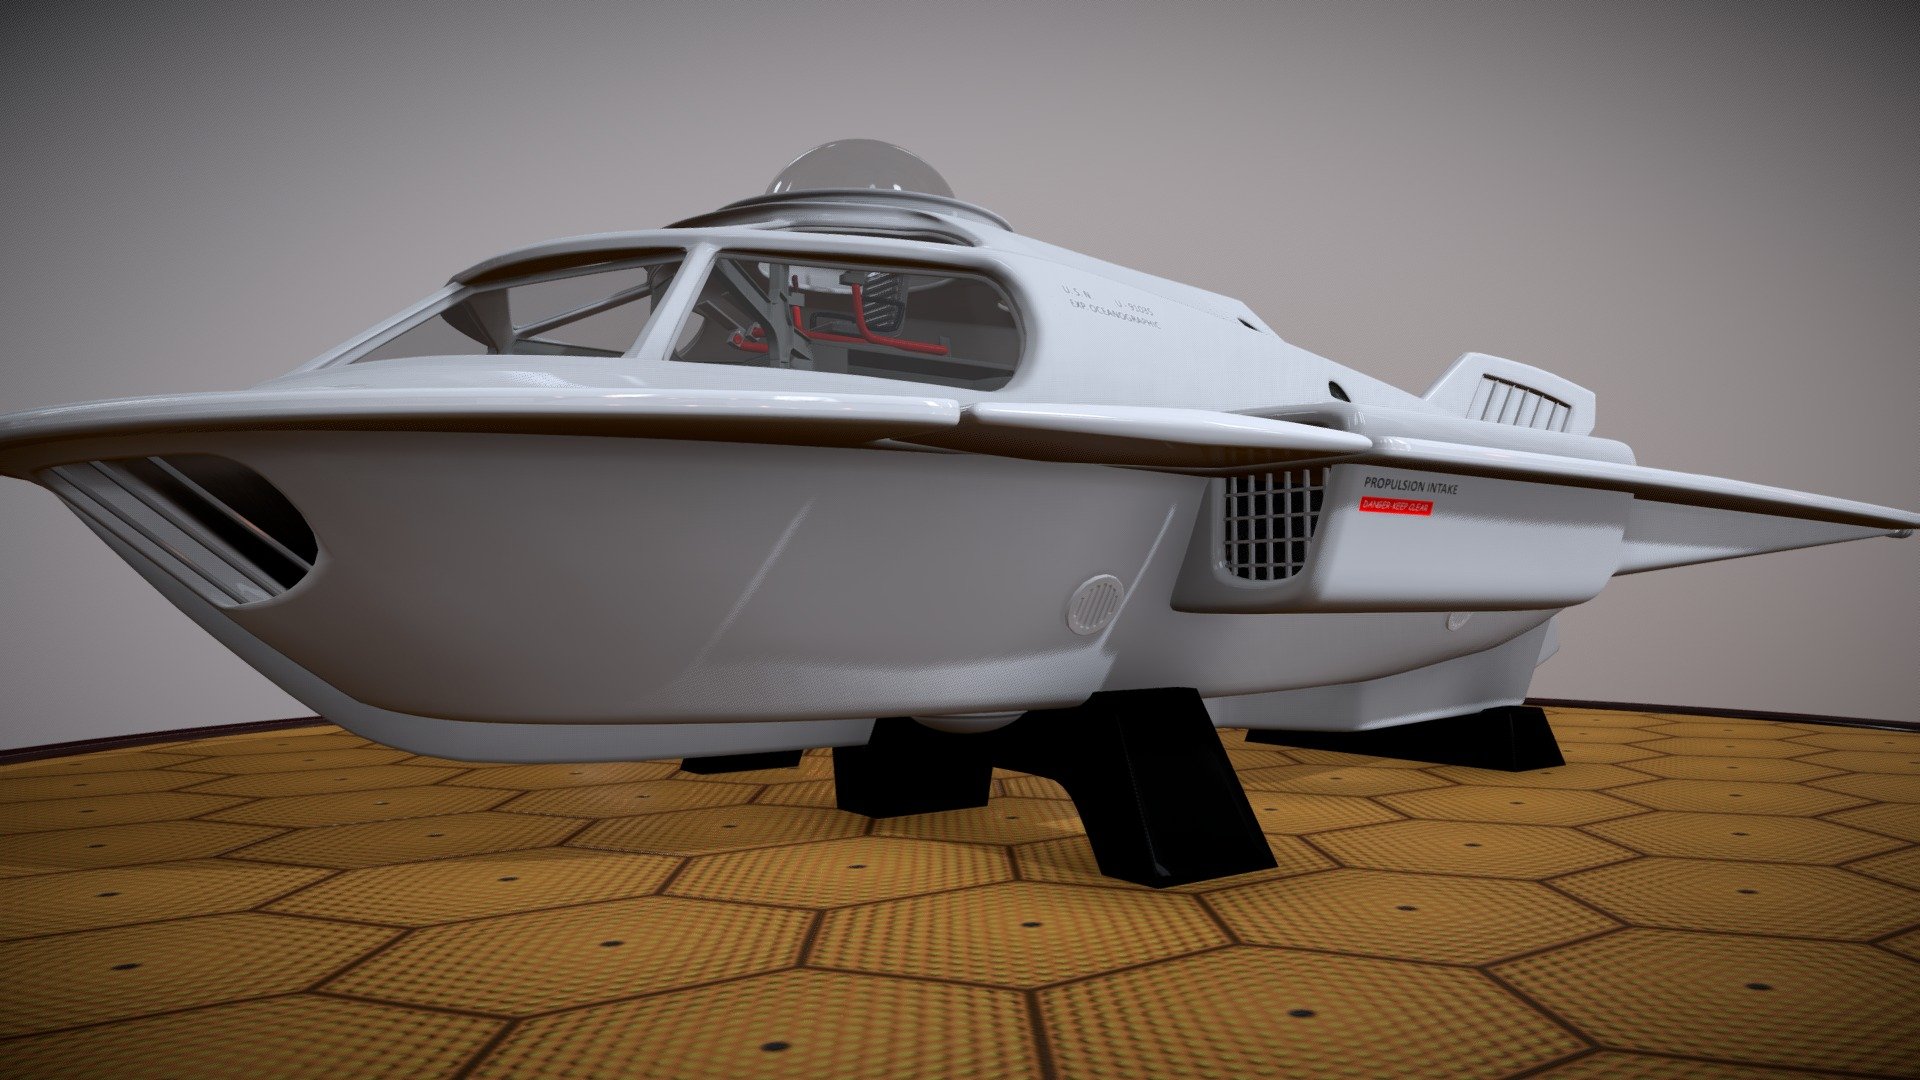 3D model of the submarine Proteus U-91035, known from the movie &ldquo;Fantastic Voyage